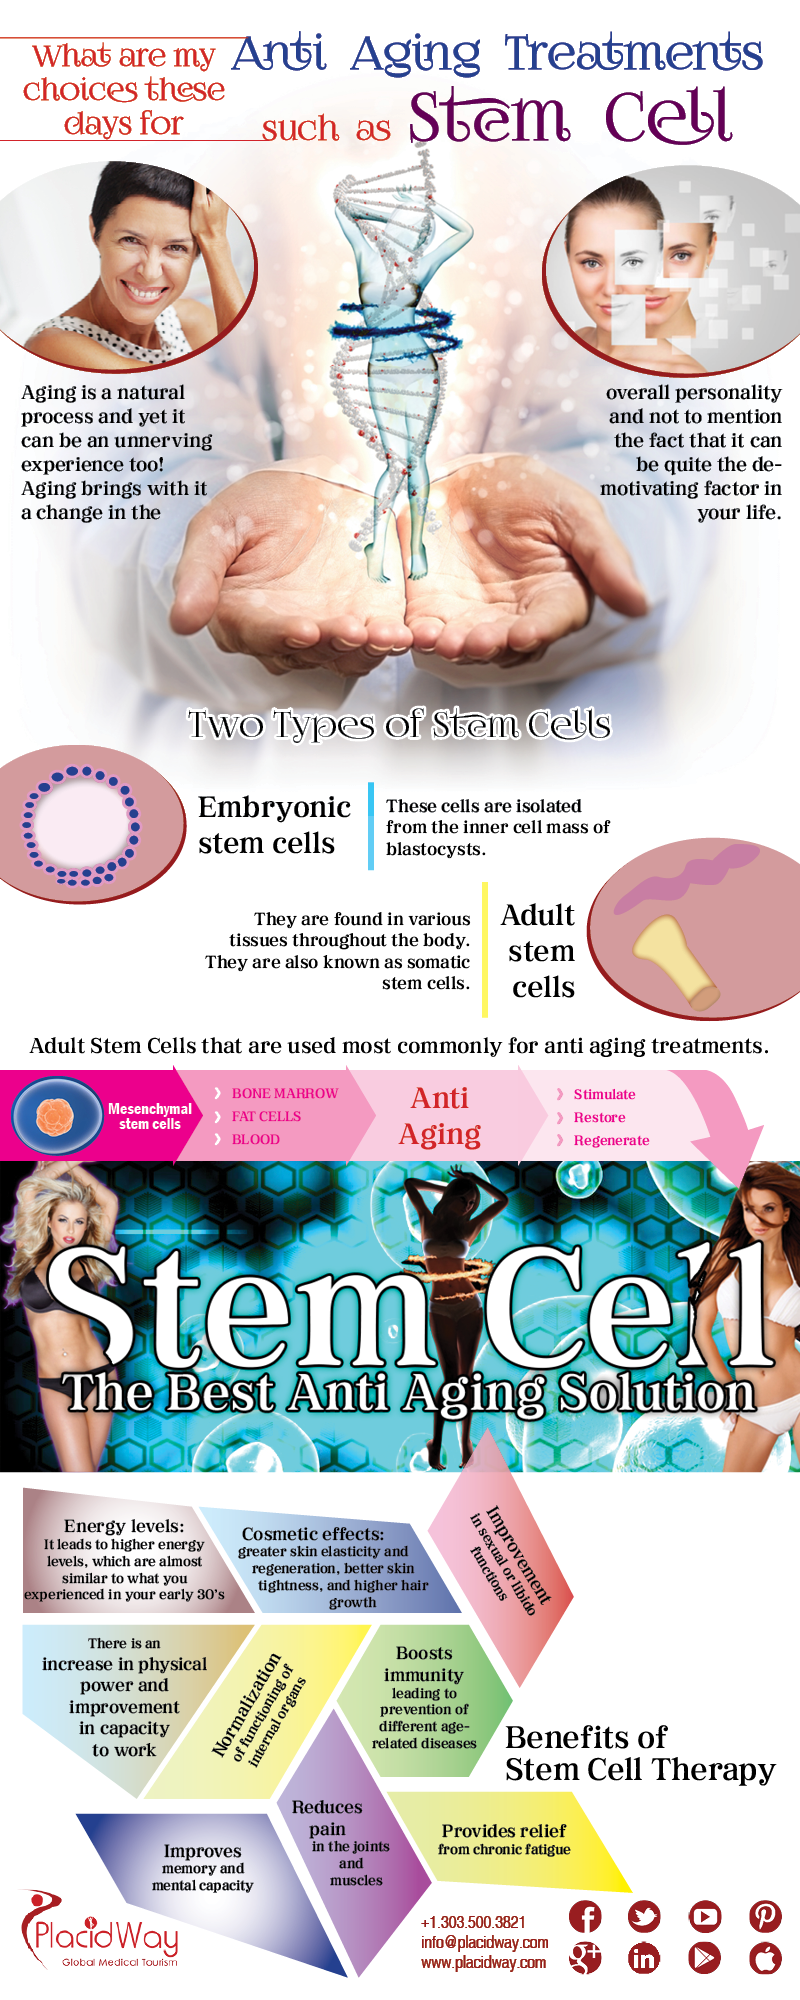 What are my choices these days for Anti Aging Treatments such as Stem Cell